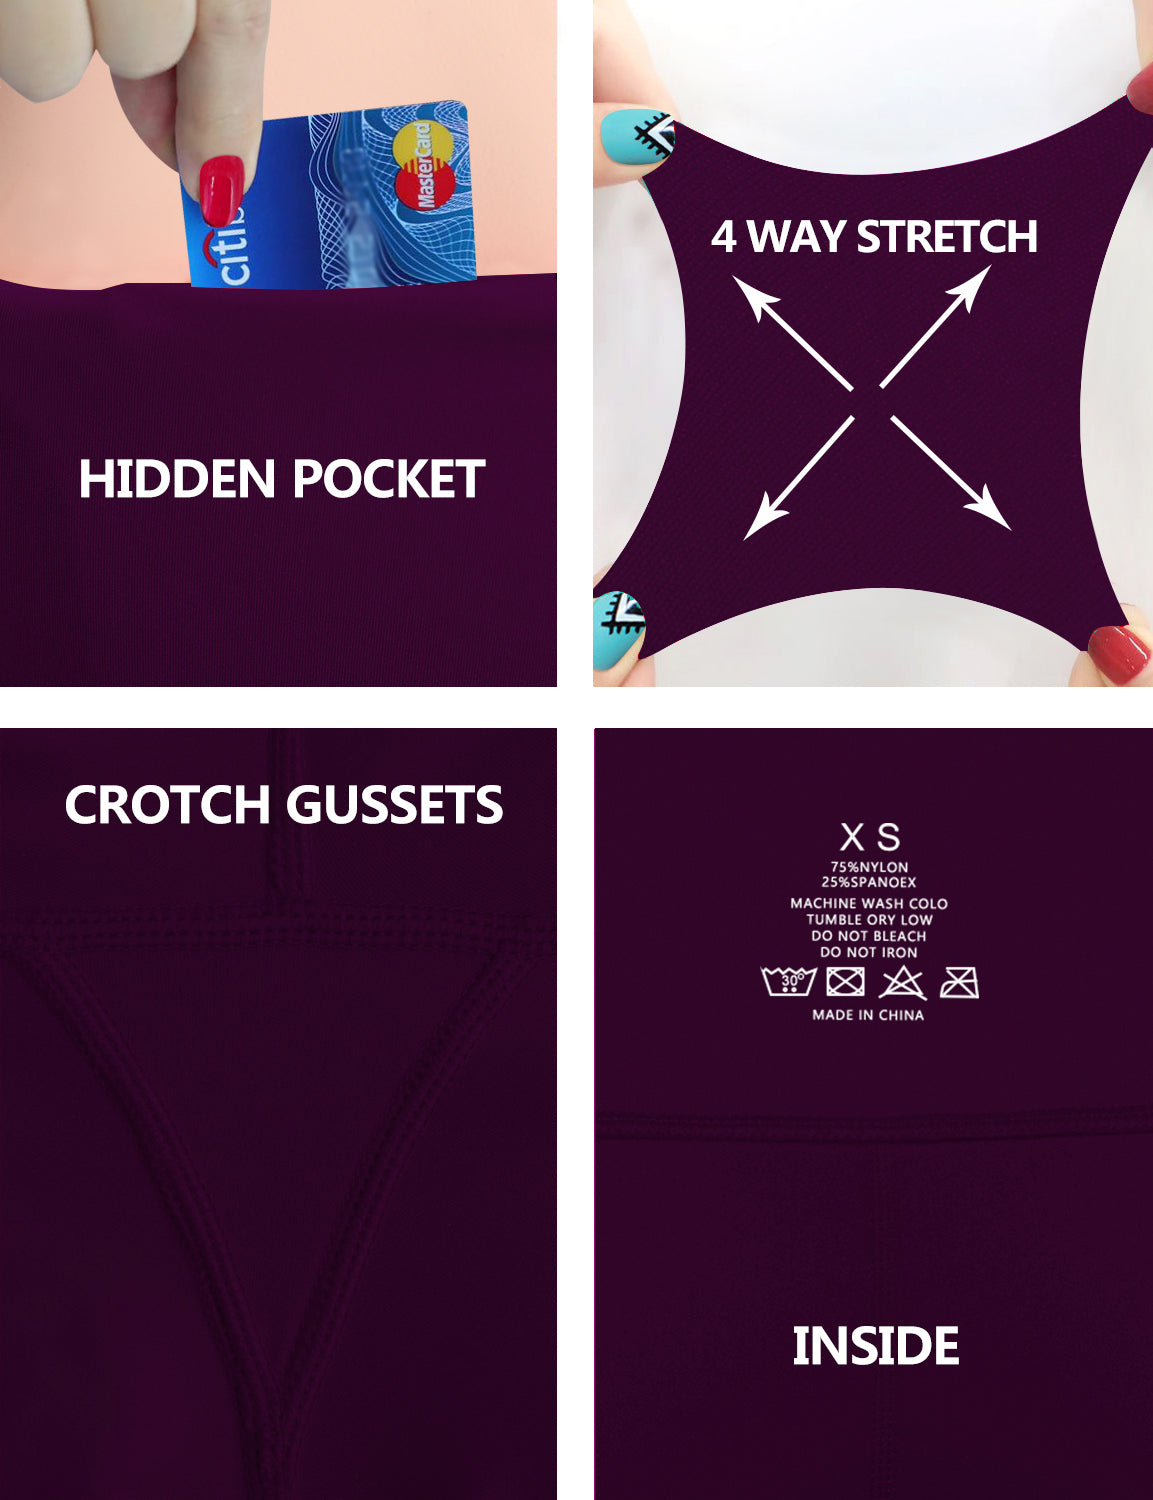 Hip Line Side Pockets Jogging Pants plum Sexy Hip Line Side Pockets 75%Nylon/25%Spandex Fabric doesn't attract lint easily 4-way stretch No see-through Moisture-wicking Tummy control Inner pocket Two lengths